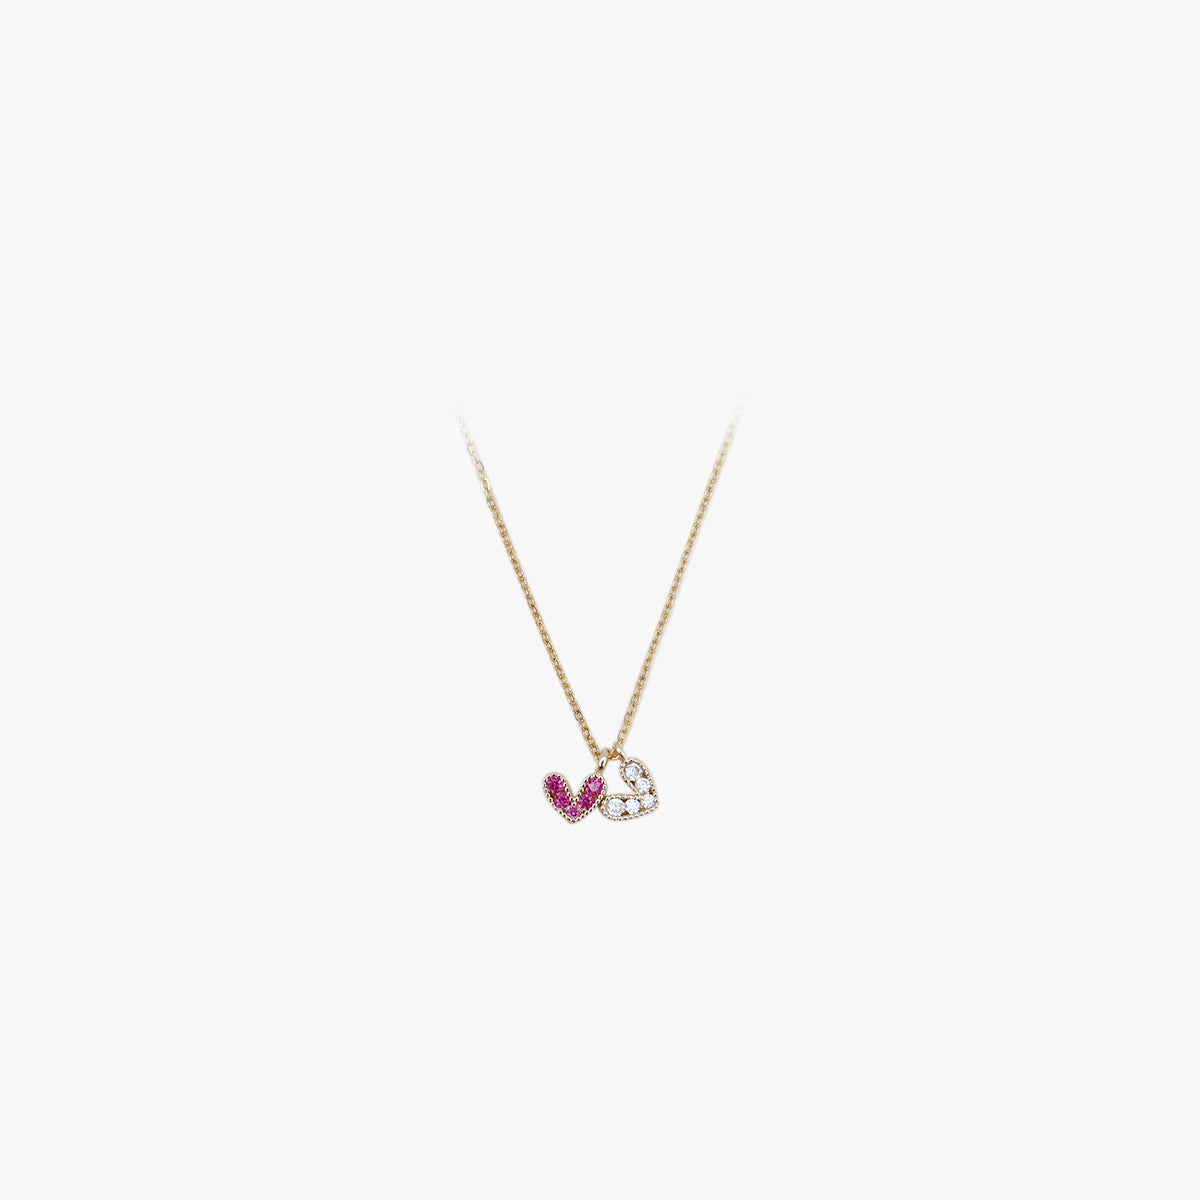 The Sweet Heart Necklace and Bracelet Bundle